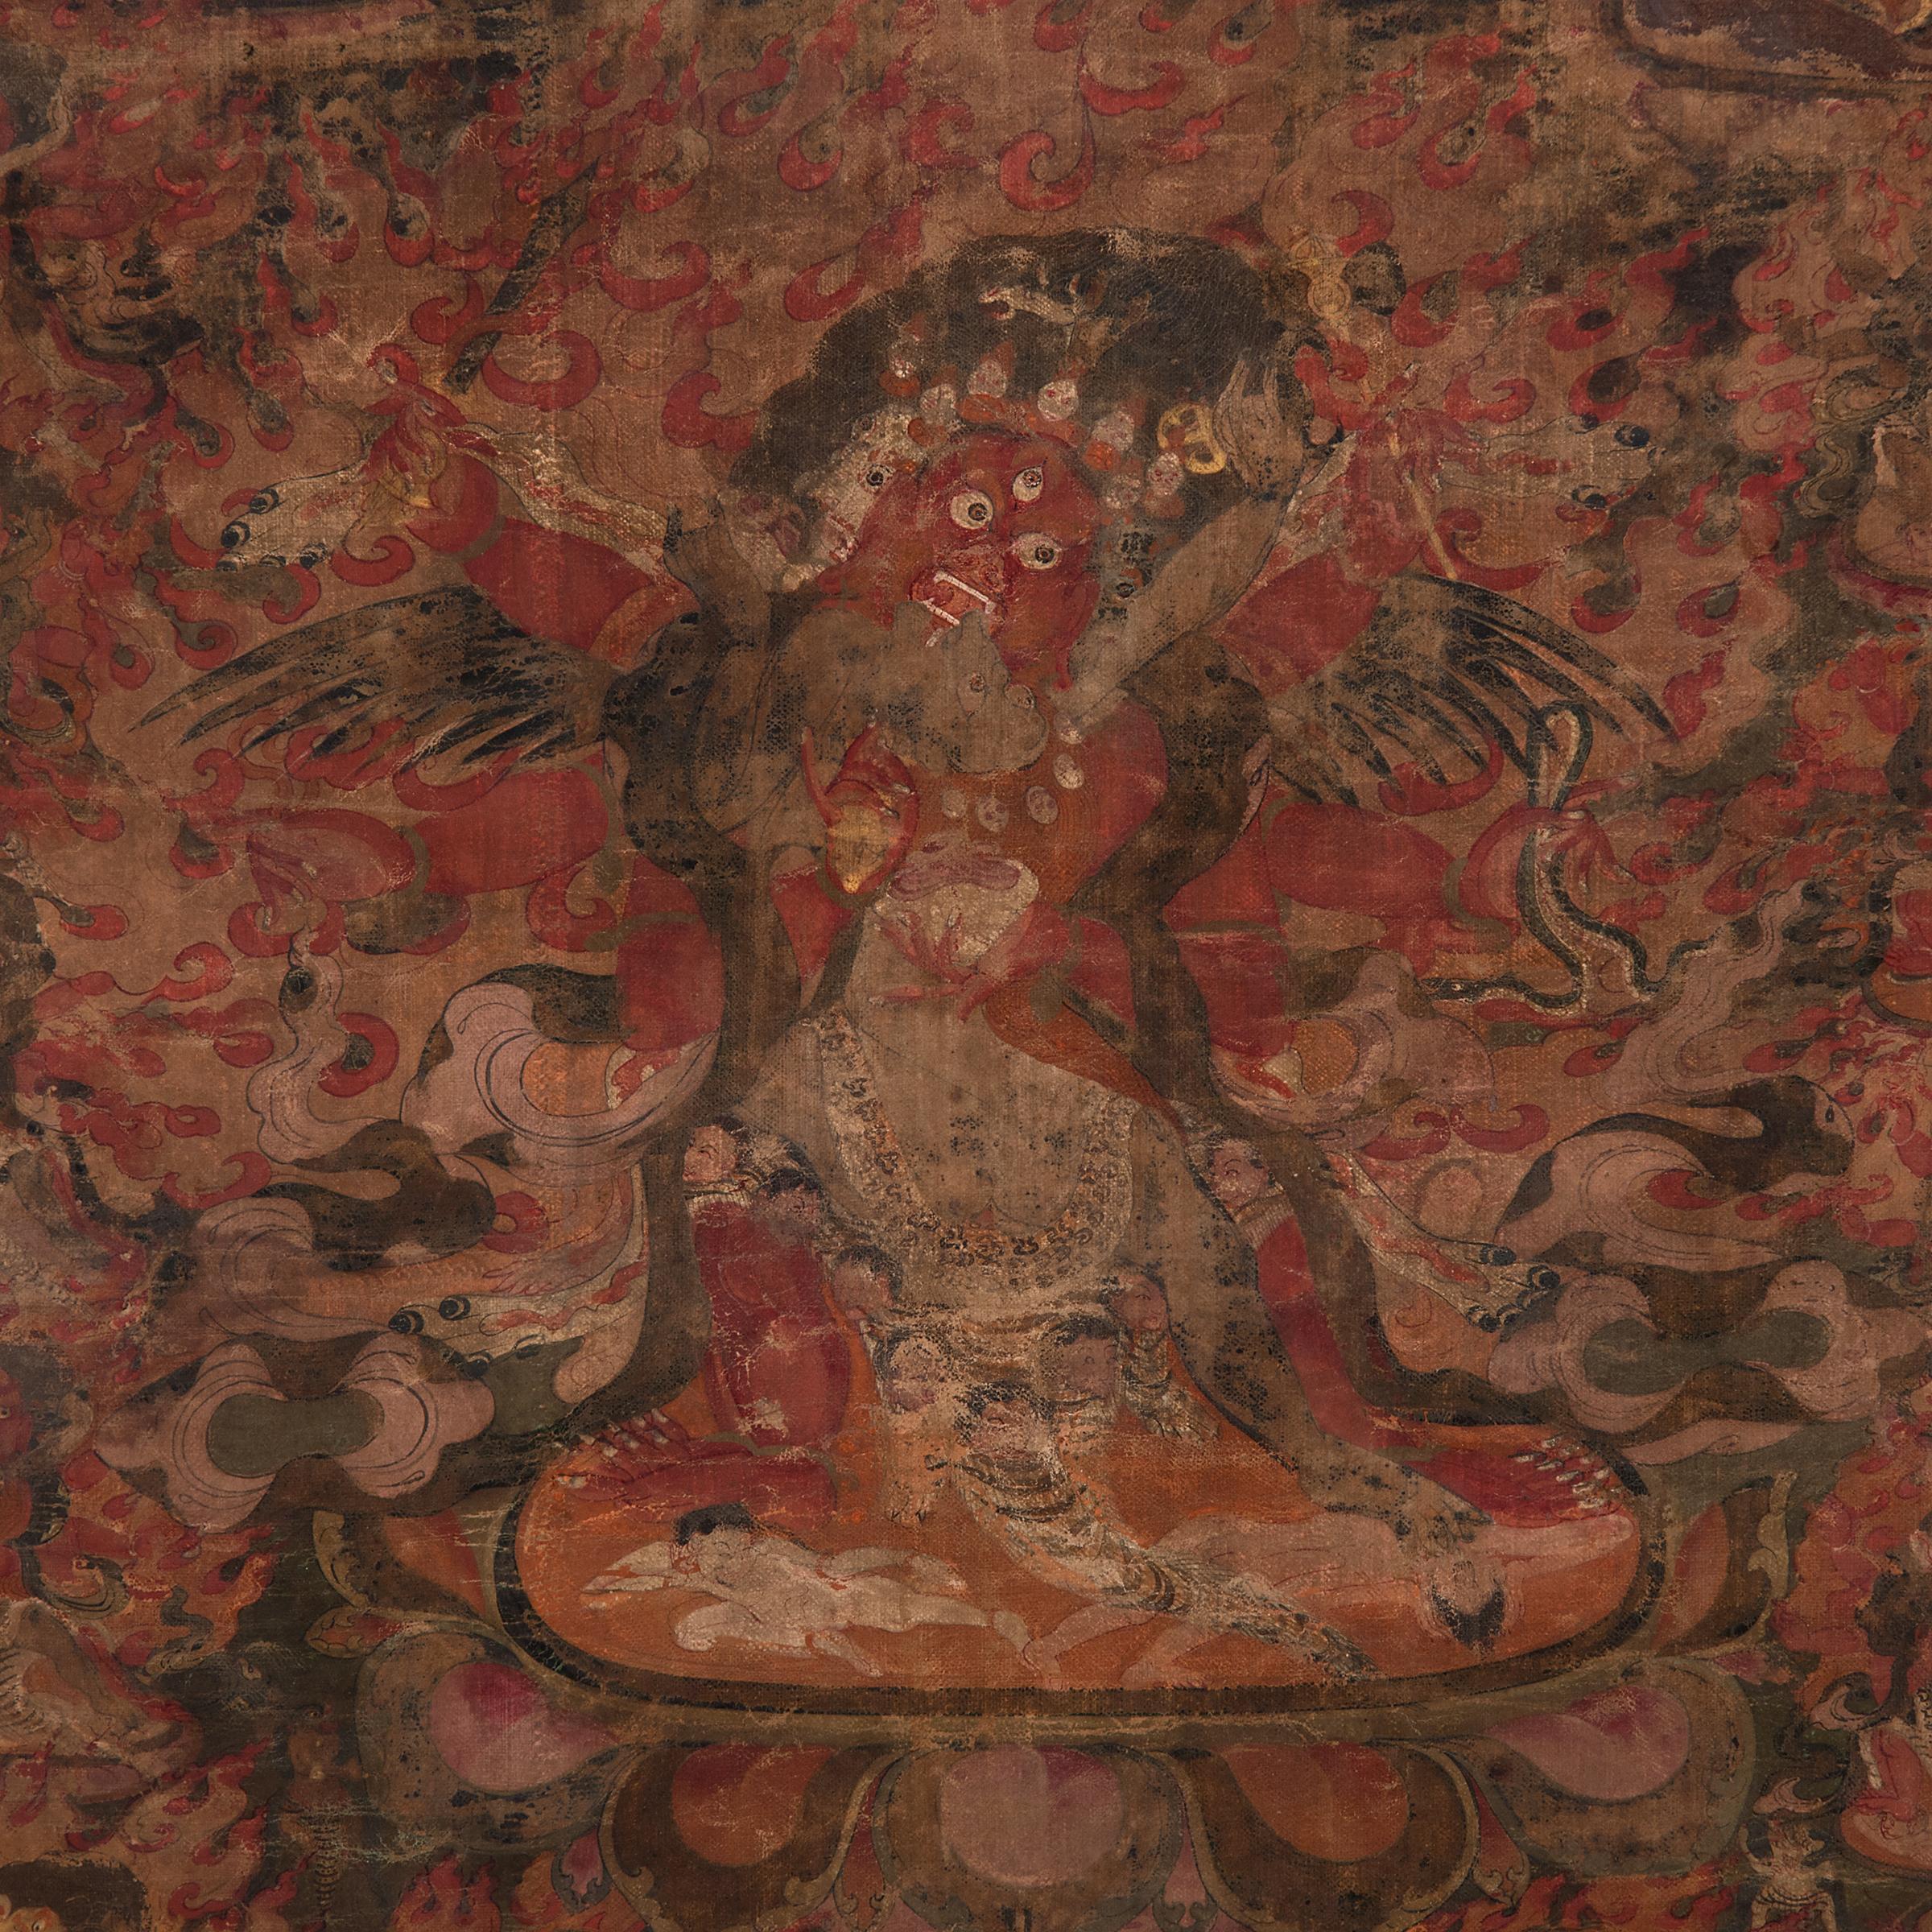 Historically in Buddhist Tibet, patrons and monks commissioned thangka art, or sacred painting, to focus their meditations and prayers. Painted with red, green, and black pigments, this 19th-century thangka depicts the wrathful god Hayagriva, the